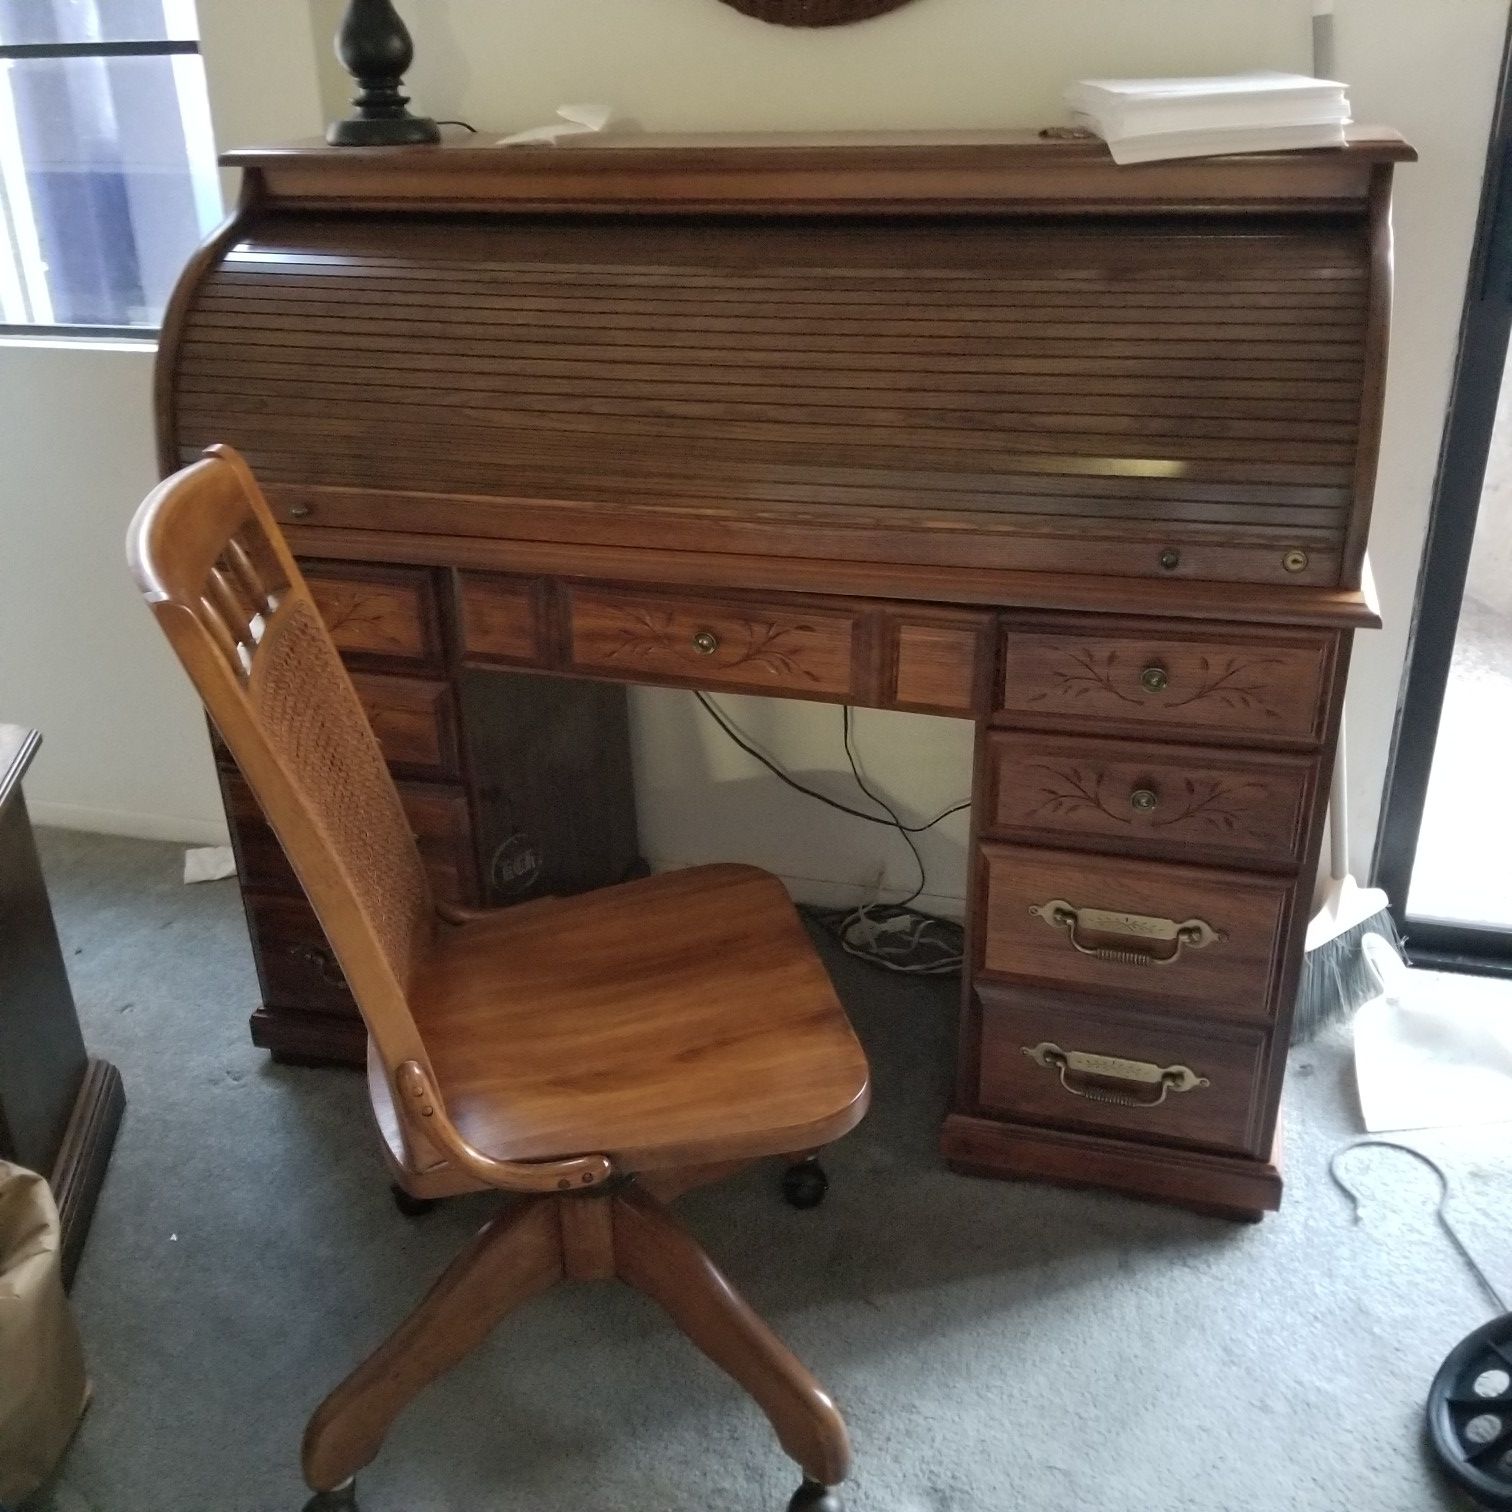 Excellent condition roll top desk that locks.